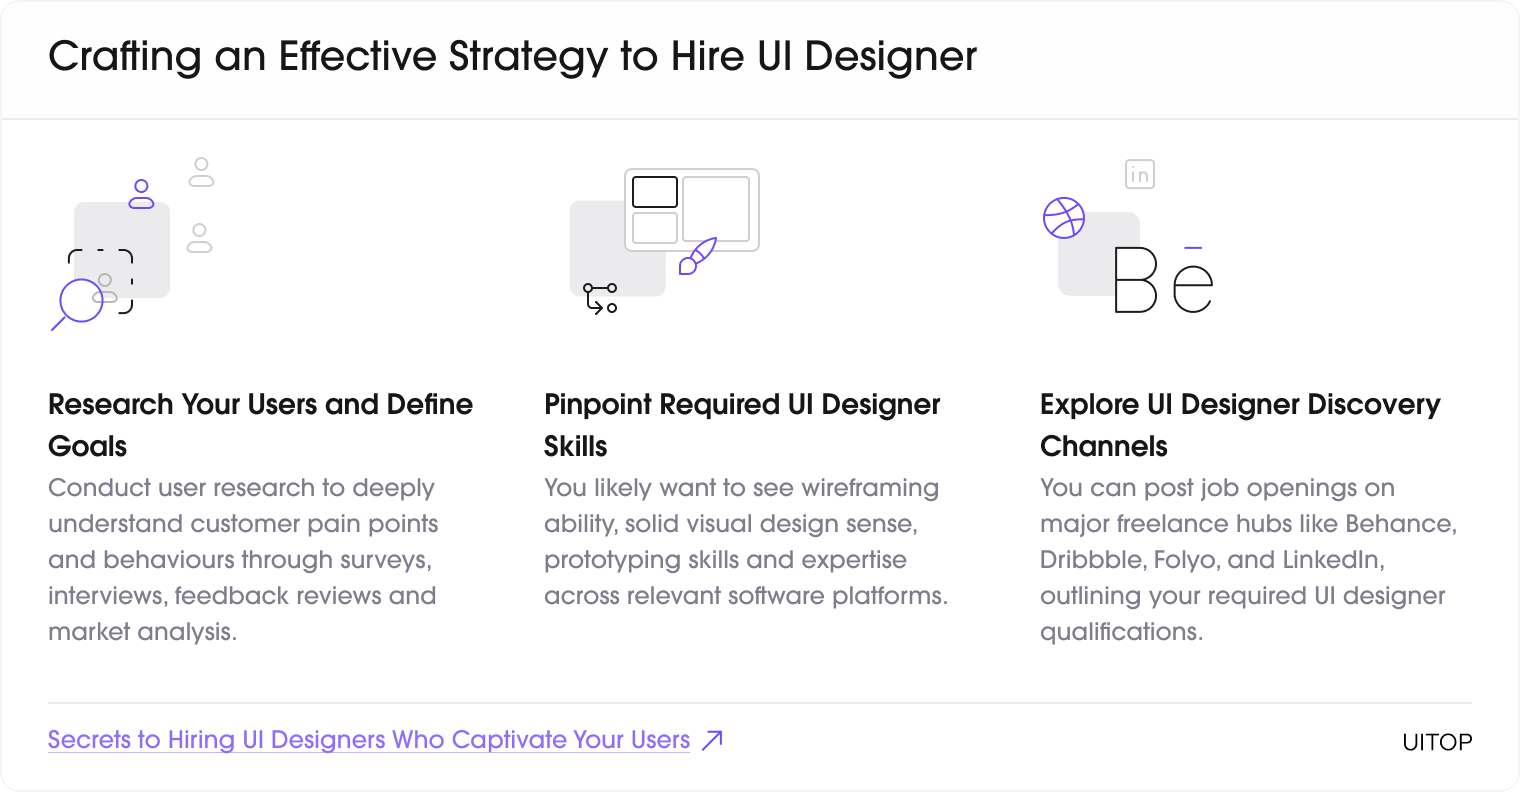 Strategy to hire UI designer